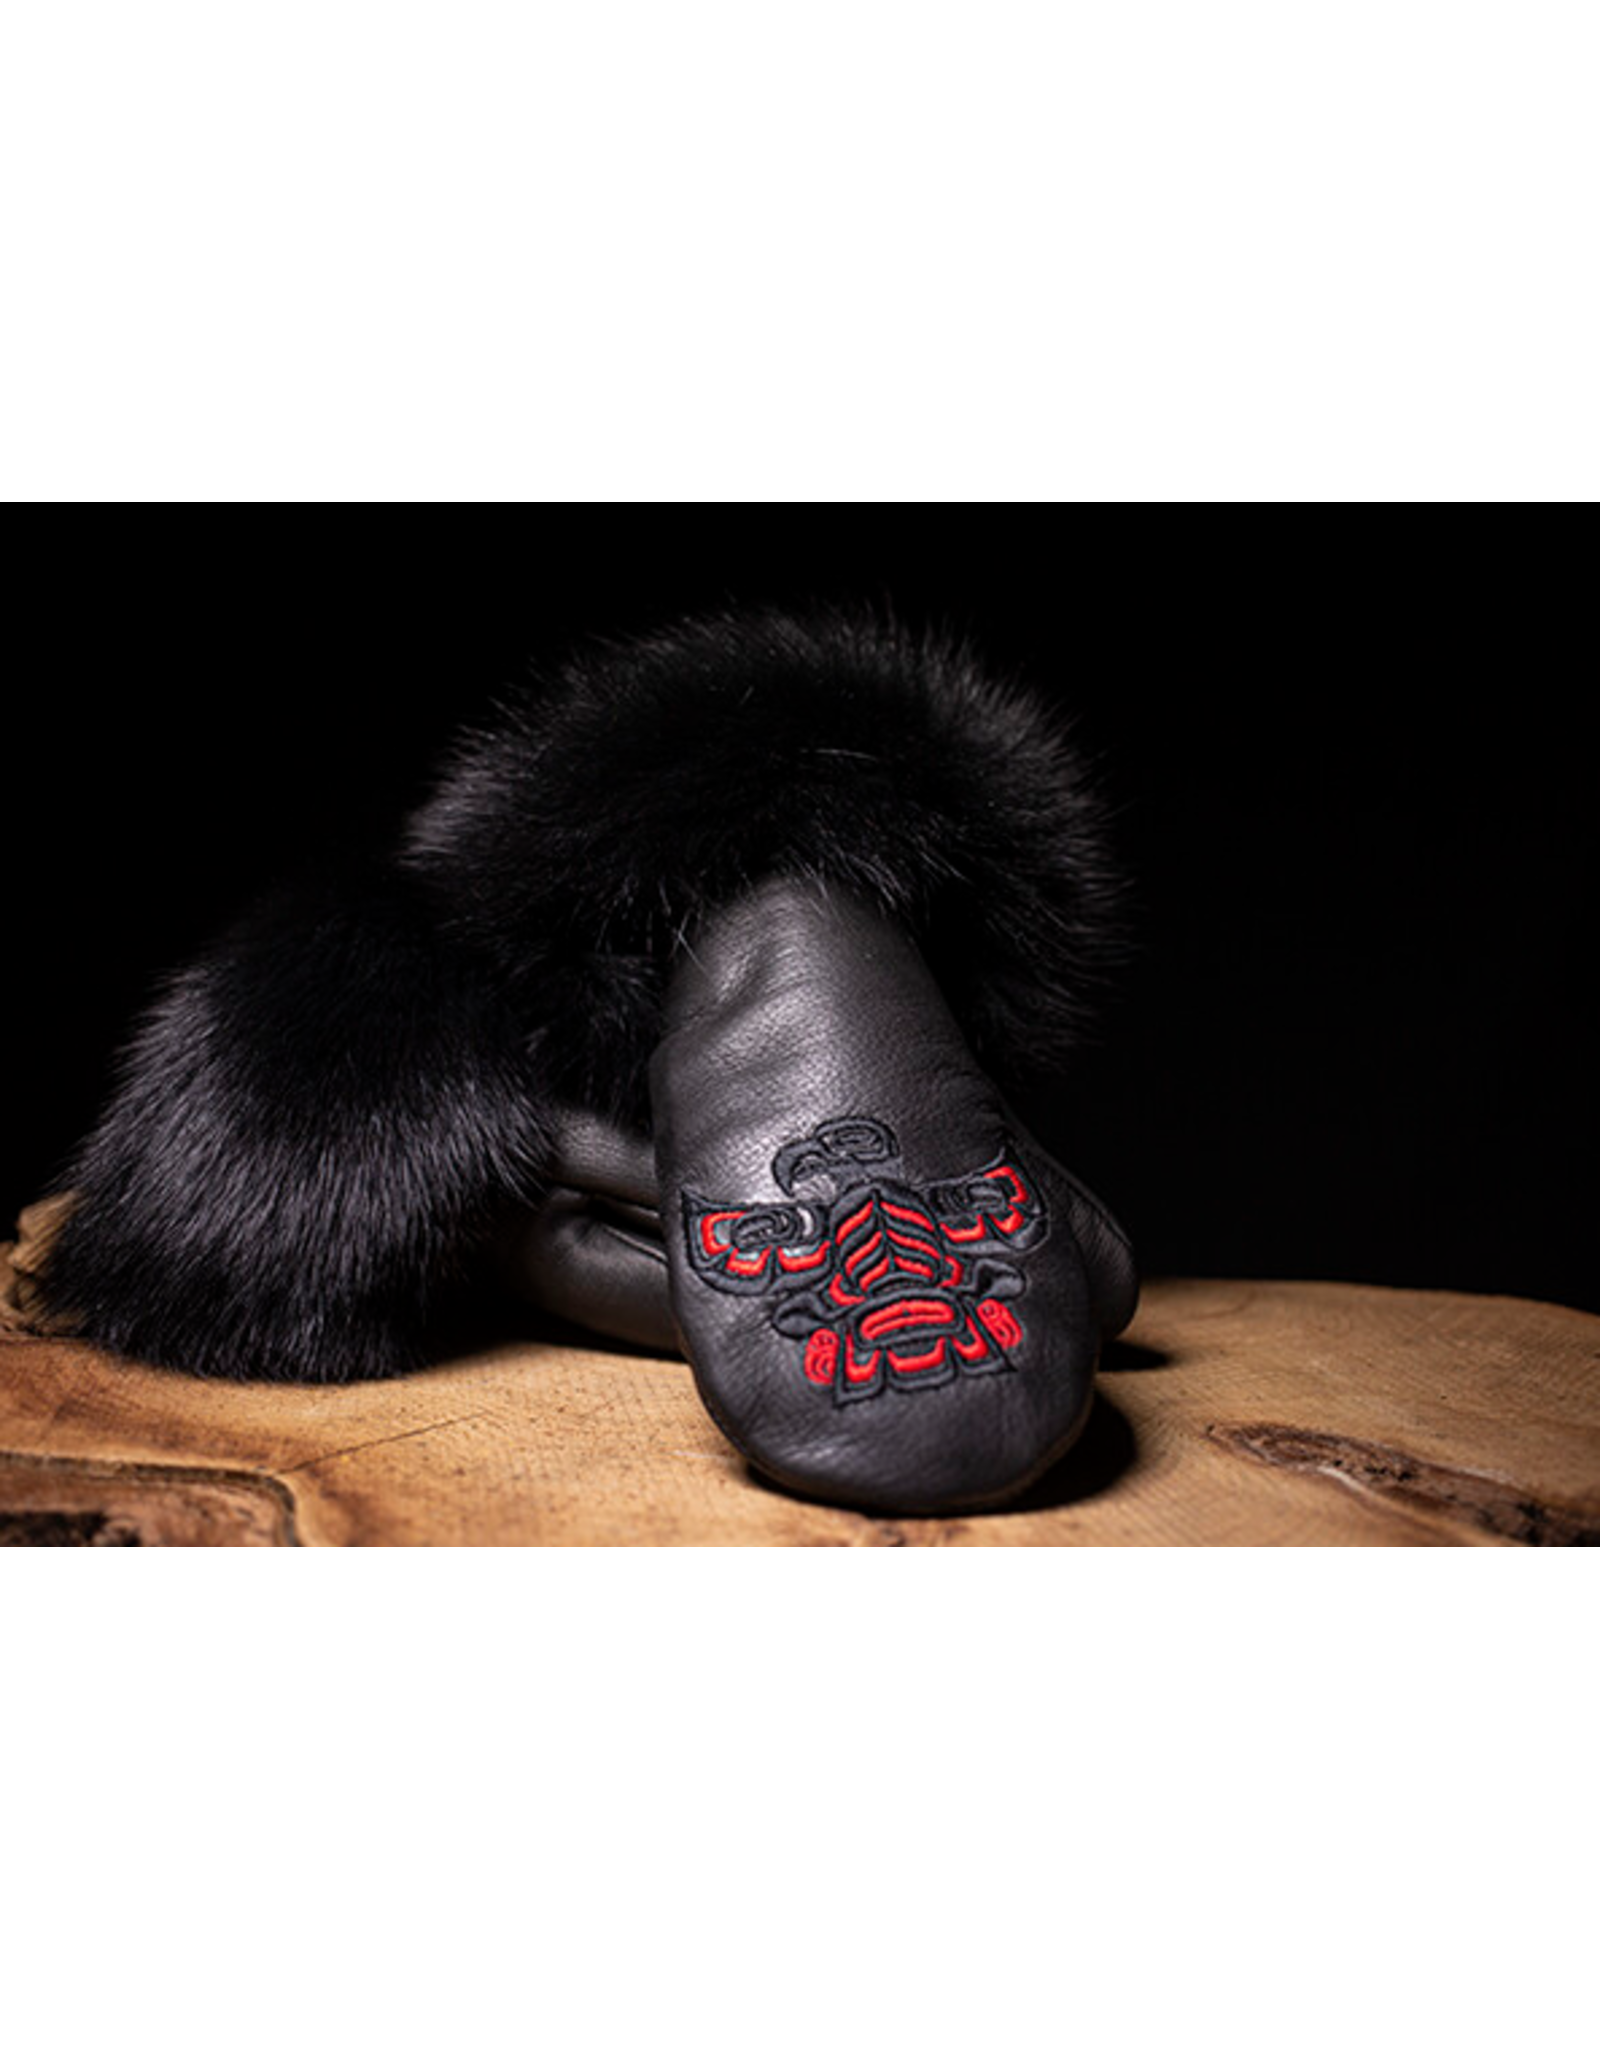 Deer Hide Mitt Black with Fur and Eagle Embroidery